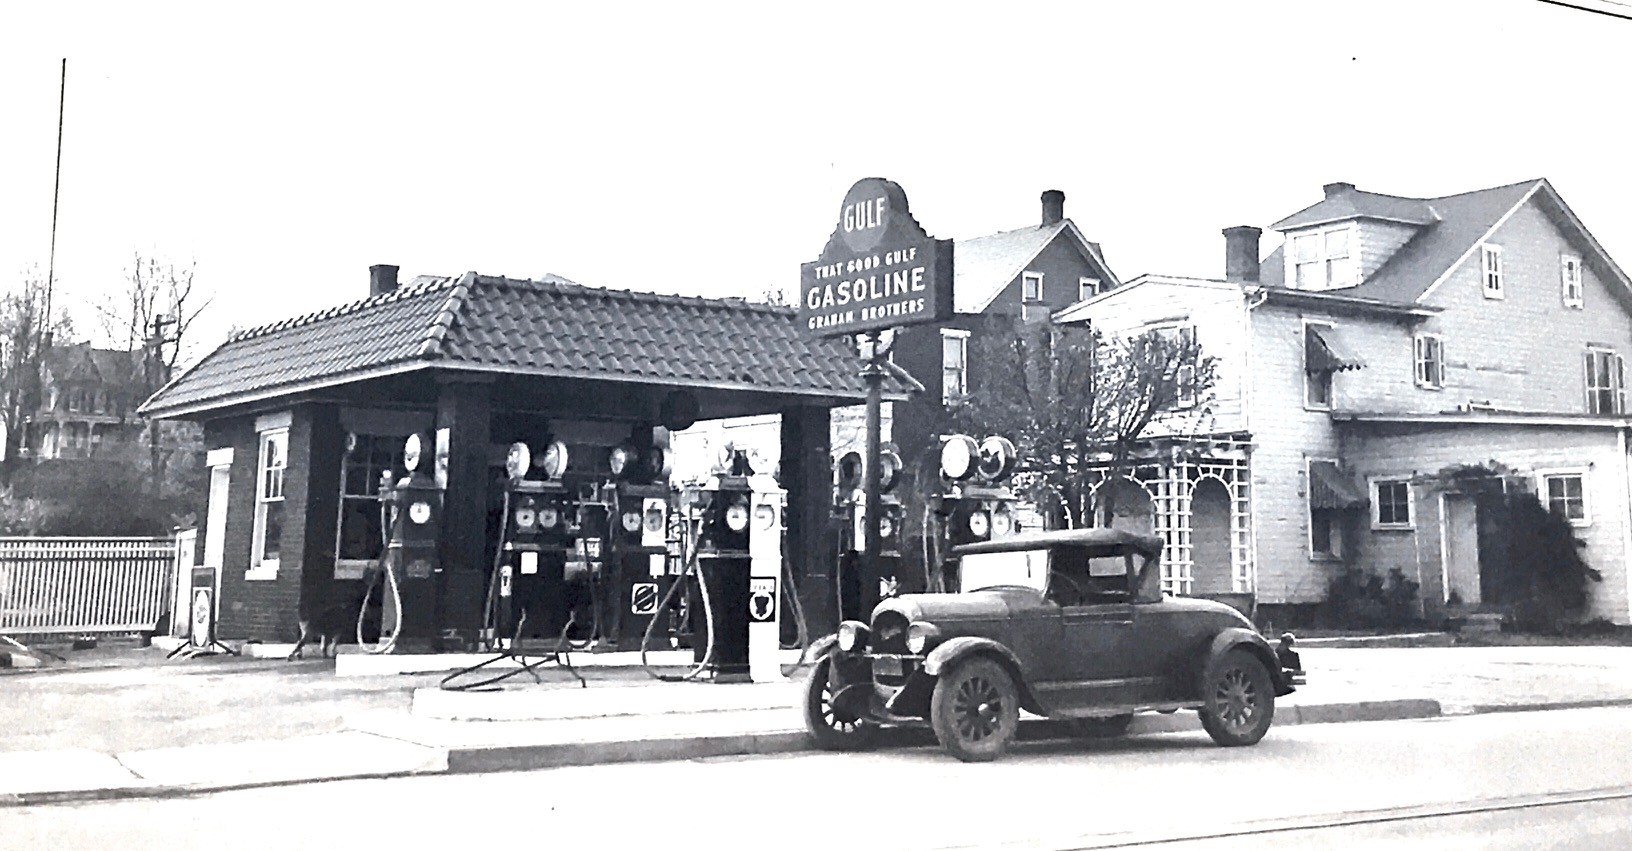 Got Gas, a collection of vintage gas station photos